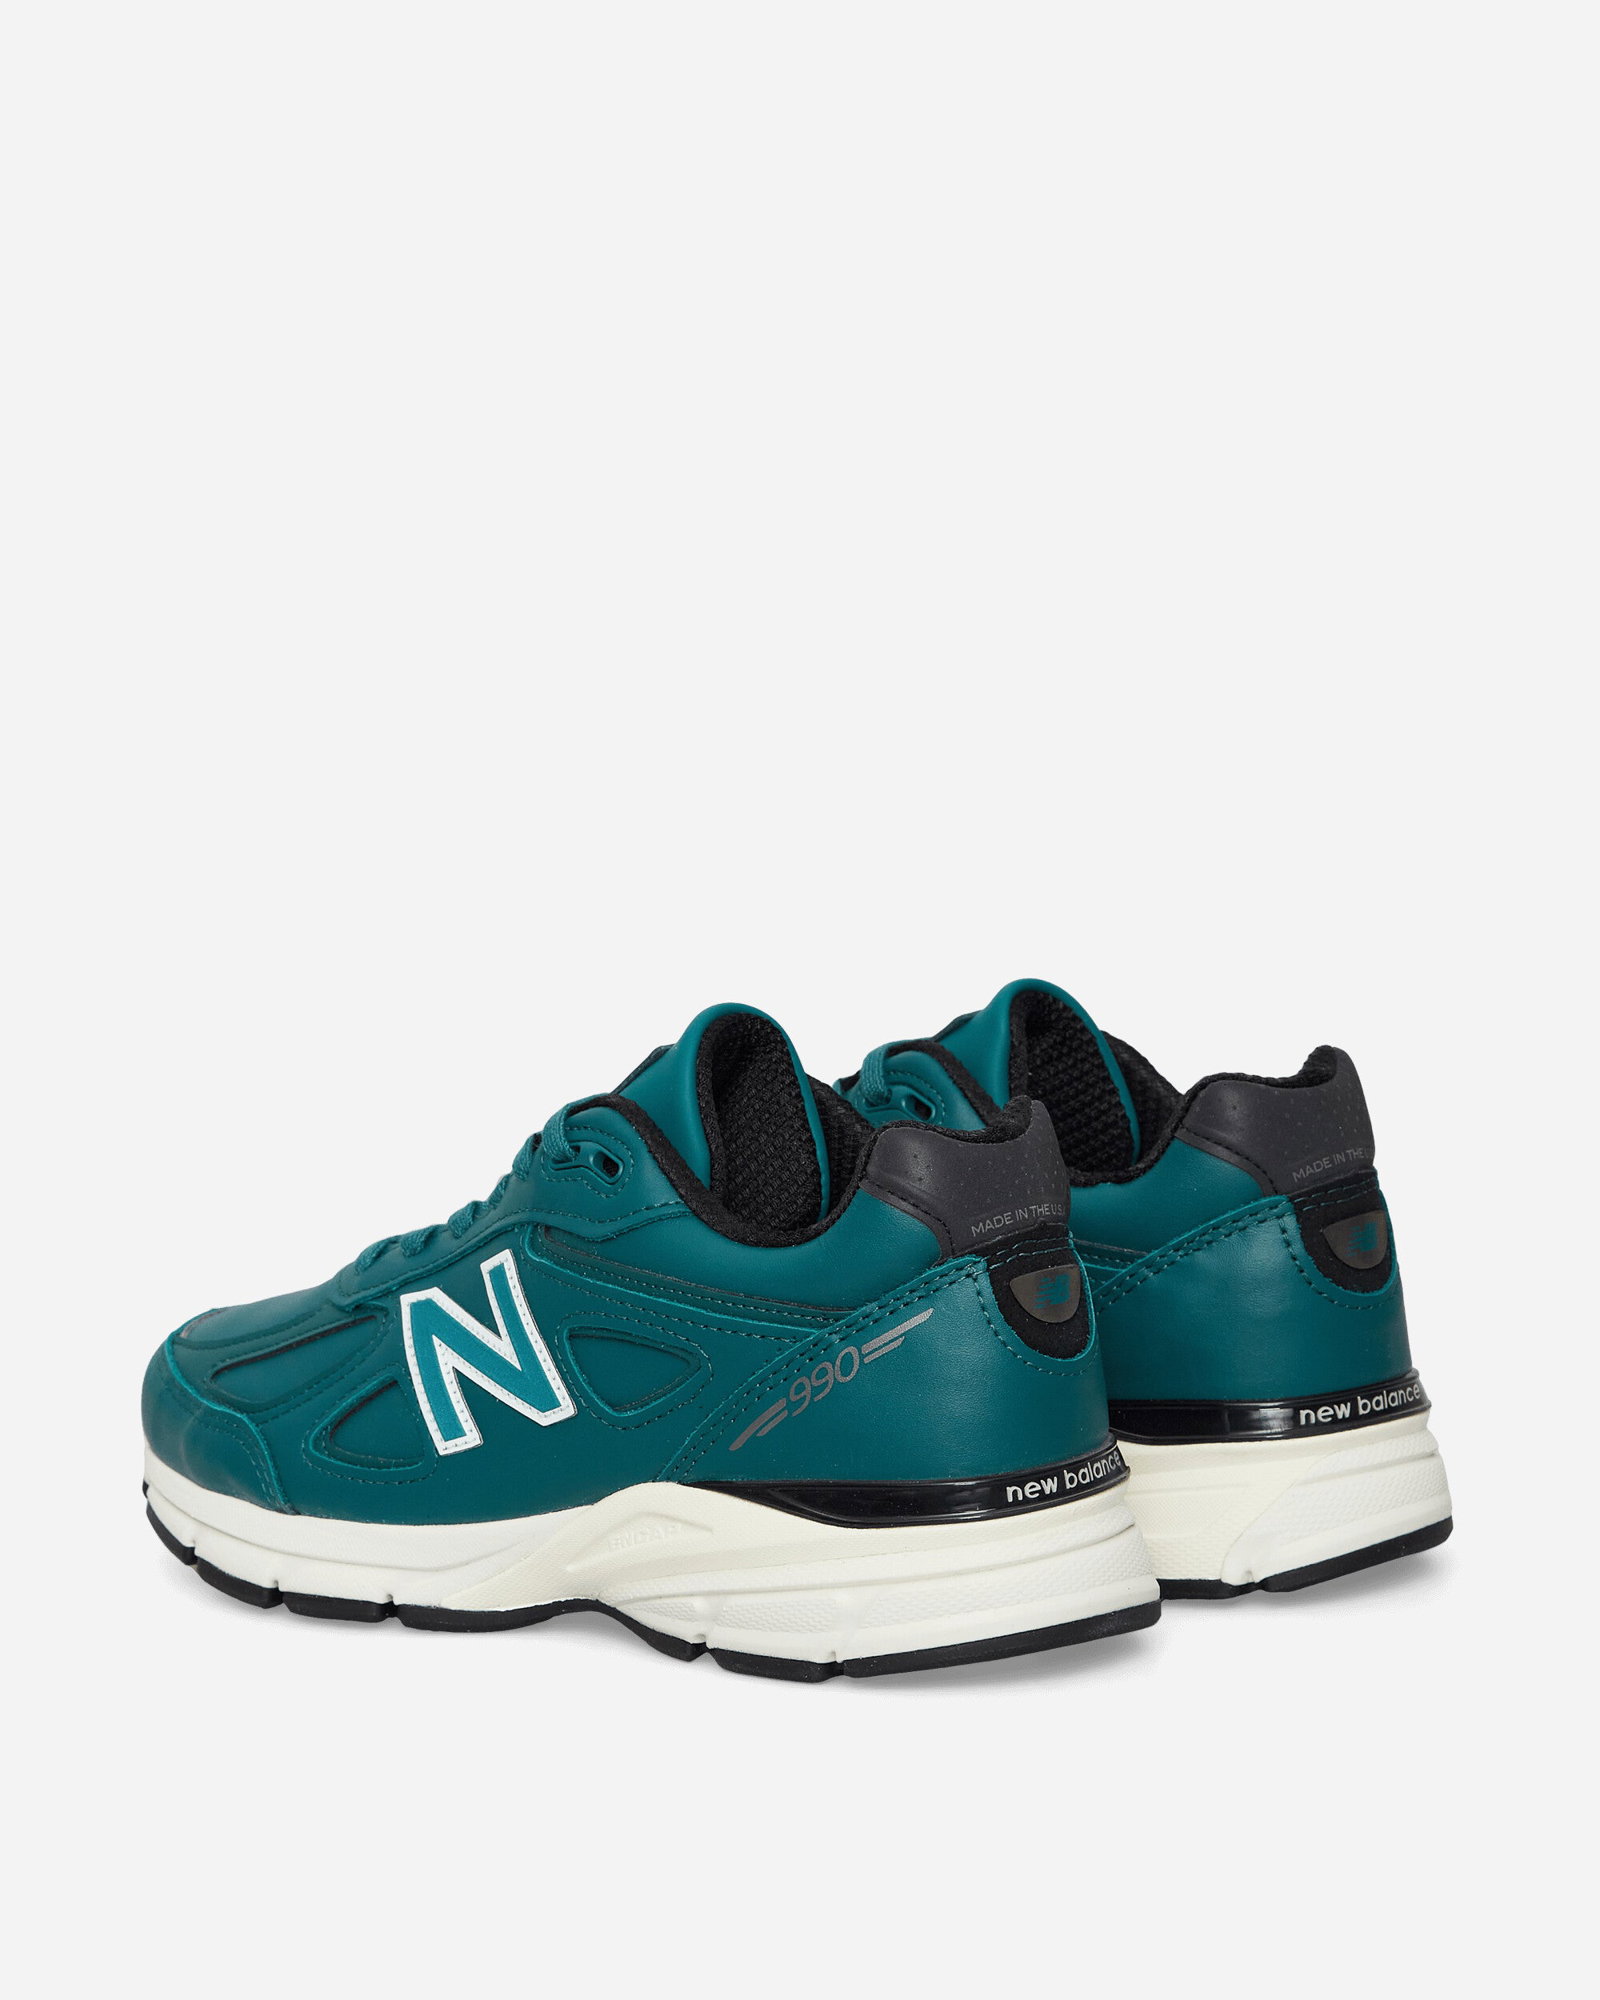 990v4 Made in USA "Teal"